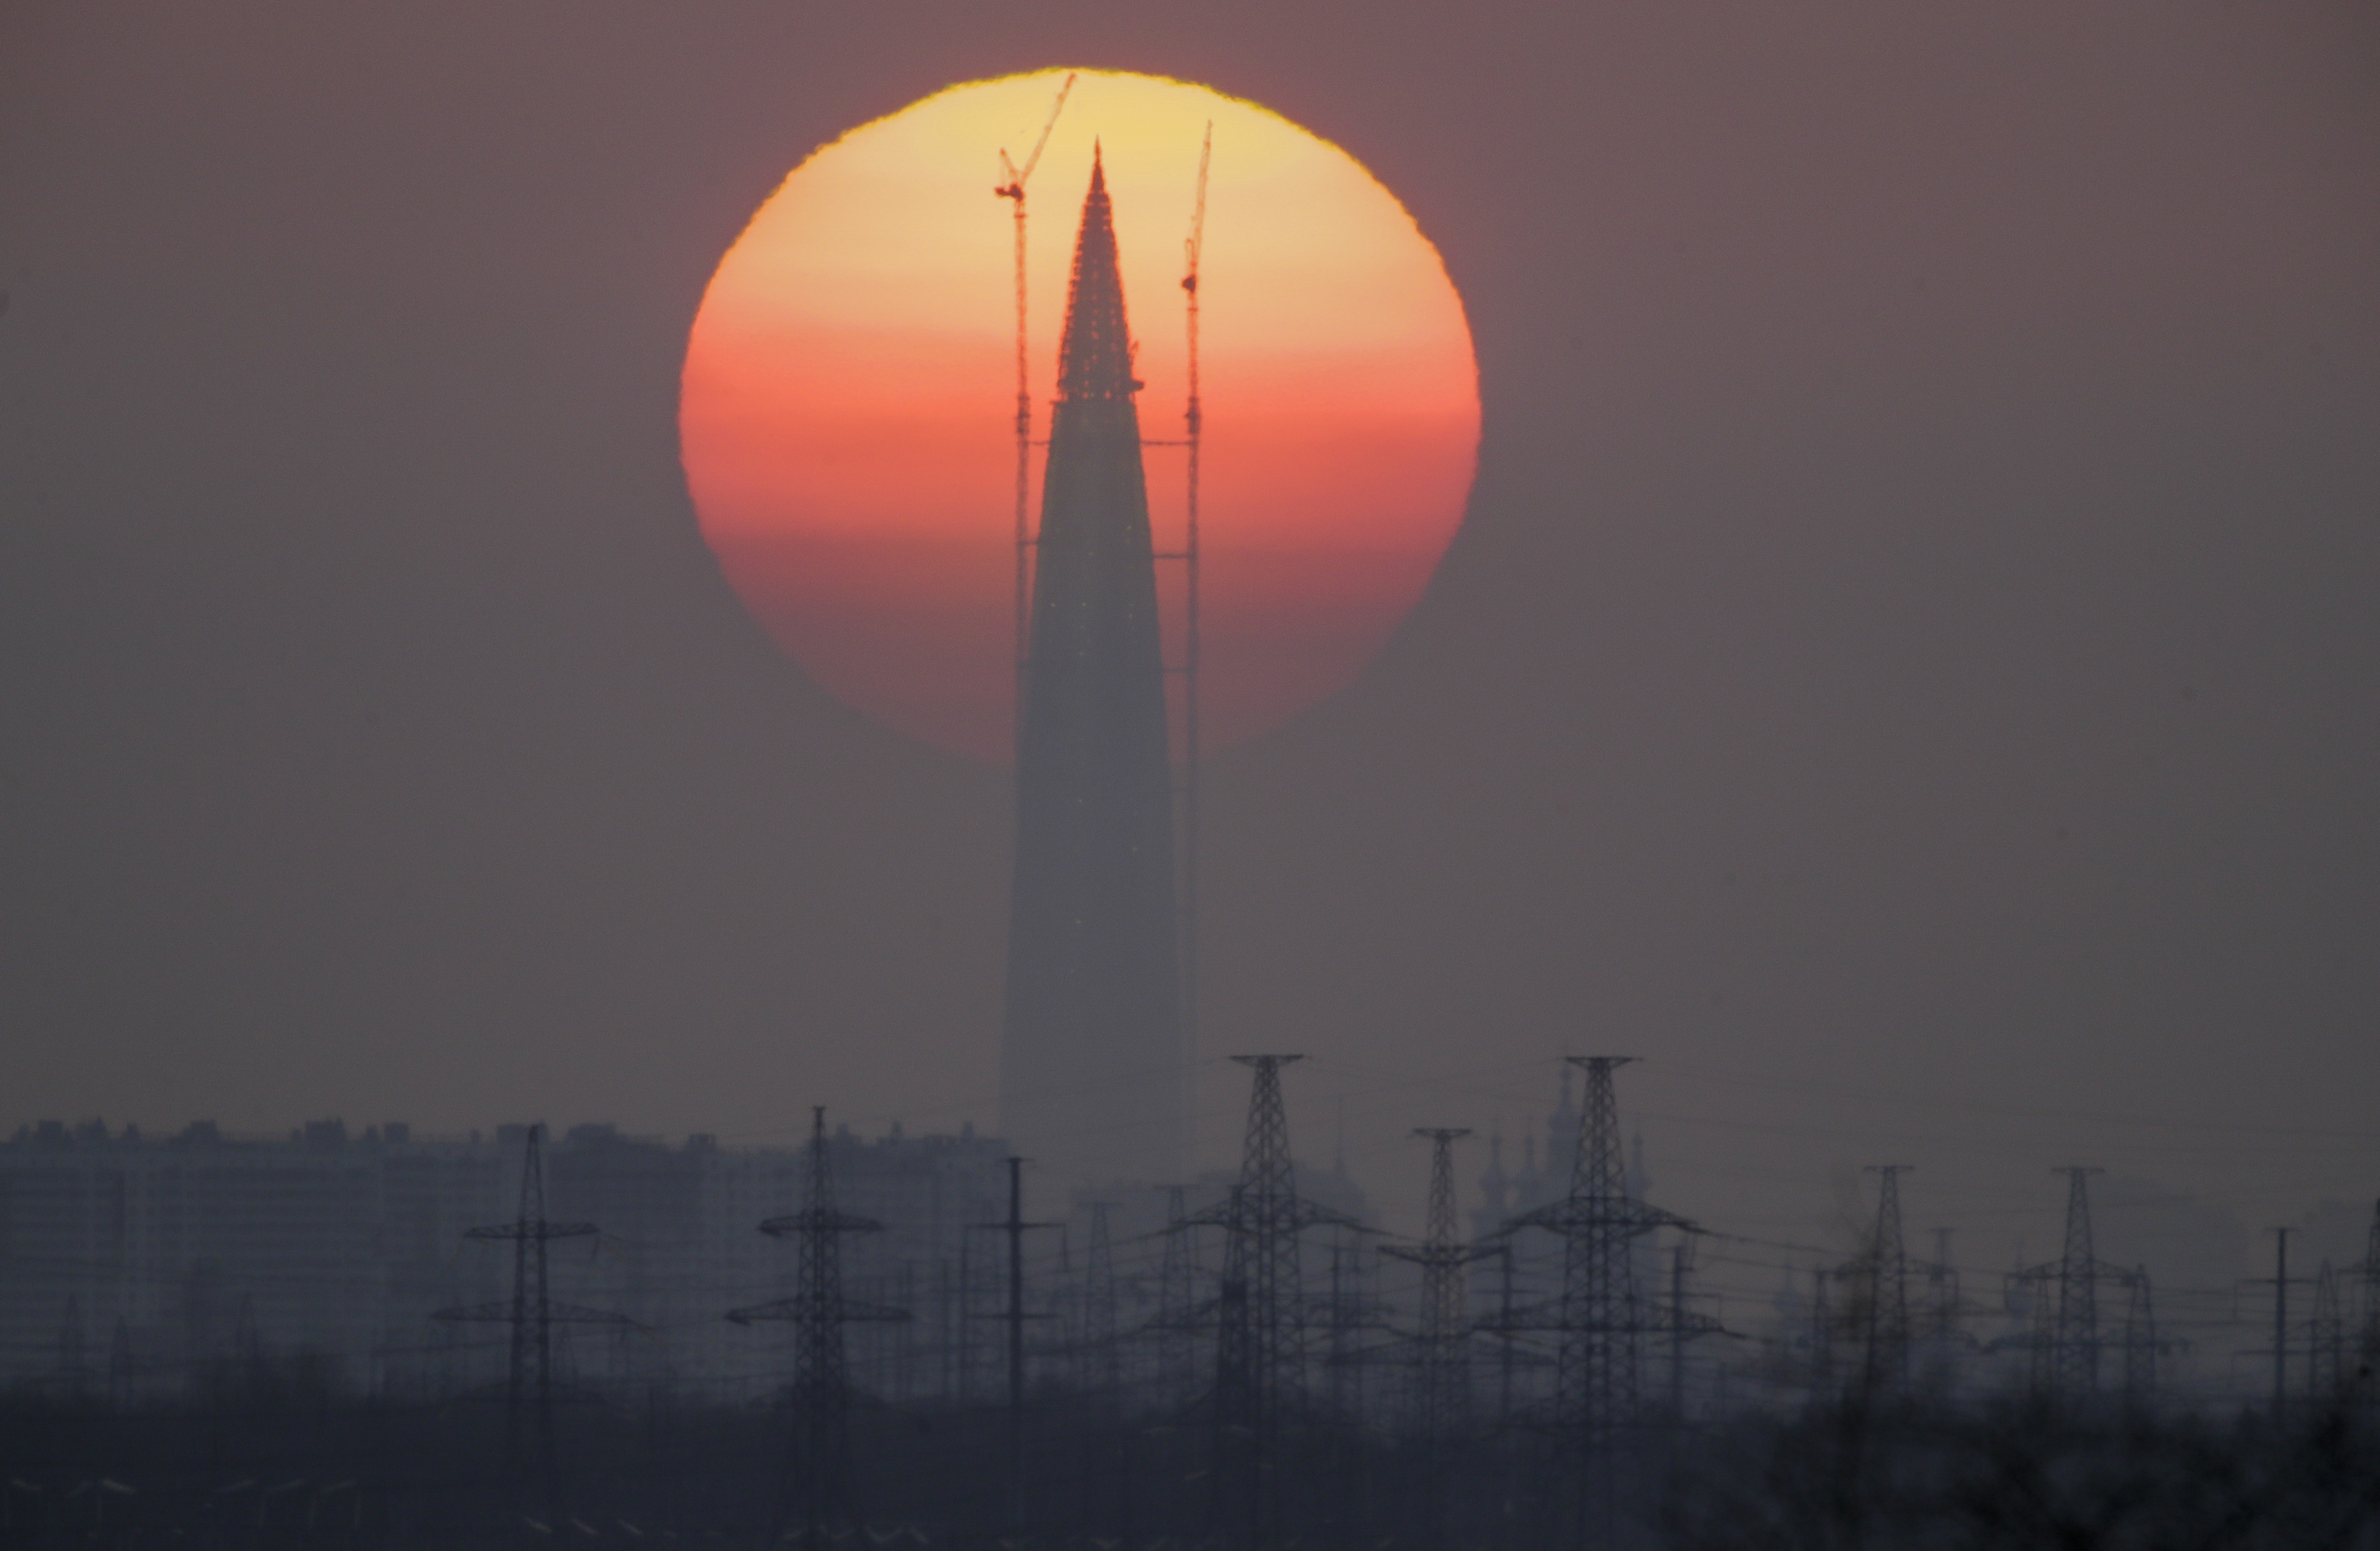 Business tower Lakhta Centre under construction, the headquarters of Russian gas monopoly Gazprom, is silhouetted against the sunset in St. Petersburg, Russia, Sunday, April 15, 2018. (AP Photo/Dmitri Lovetsky)